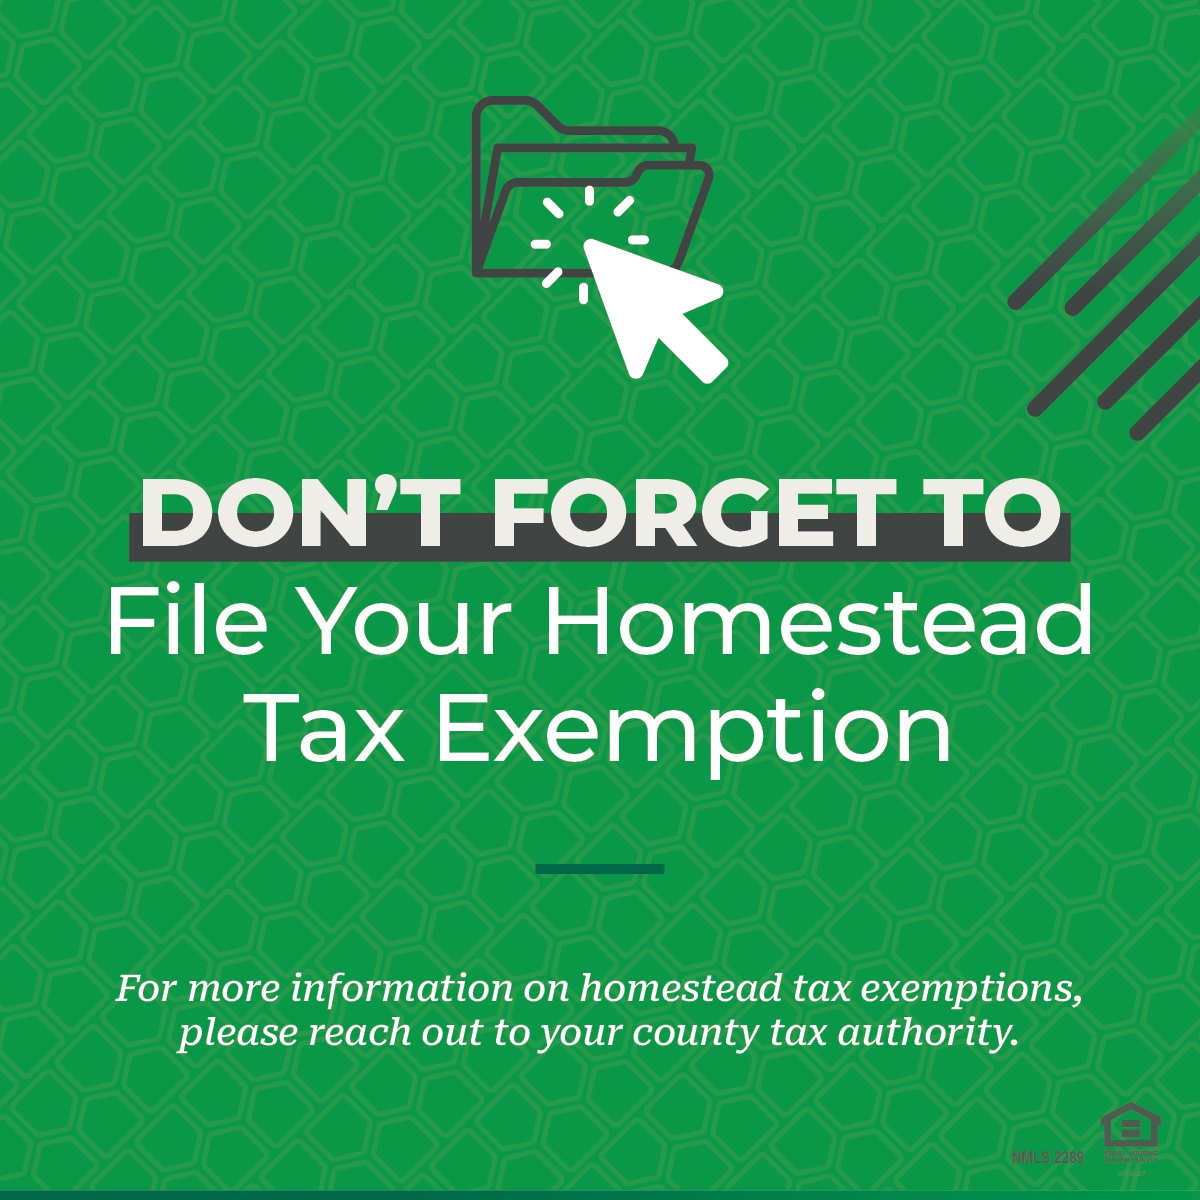 Remember to file your mortgage exemption this year in the county where your home is located. Please keep in mind that homestead tax exemption guidelines may vary by county and state.
#homesteadexemption #homepurchase